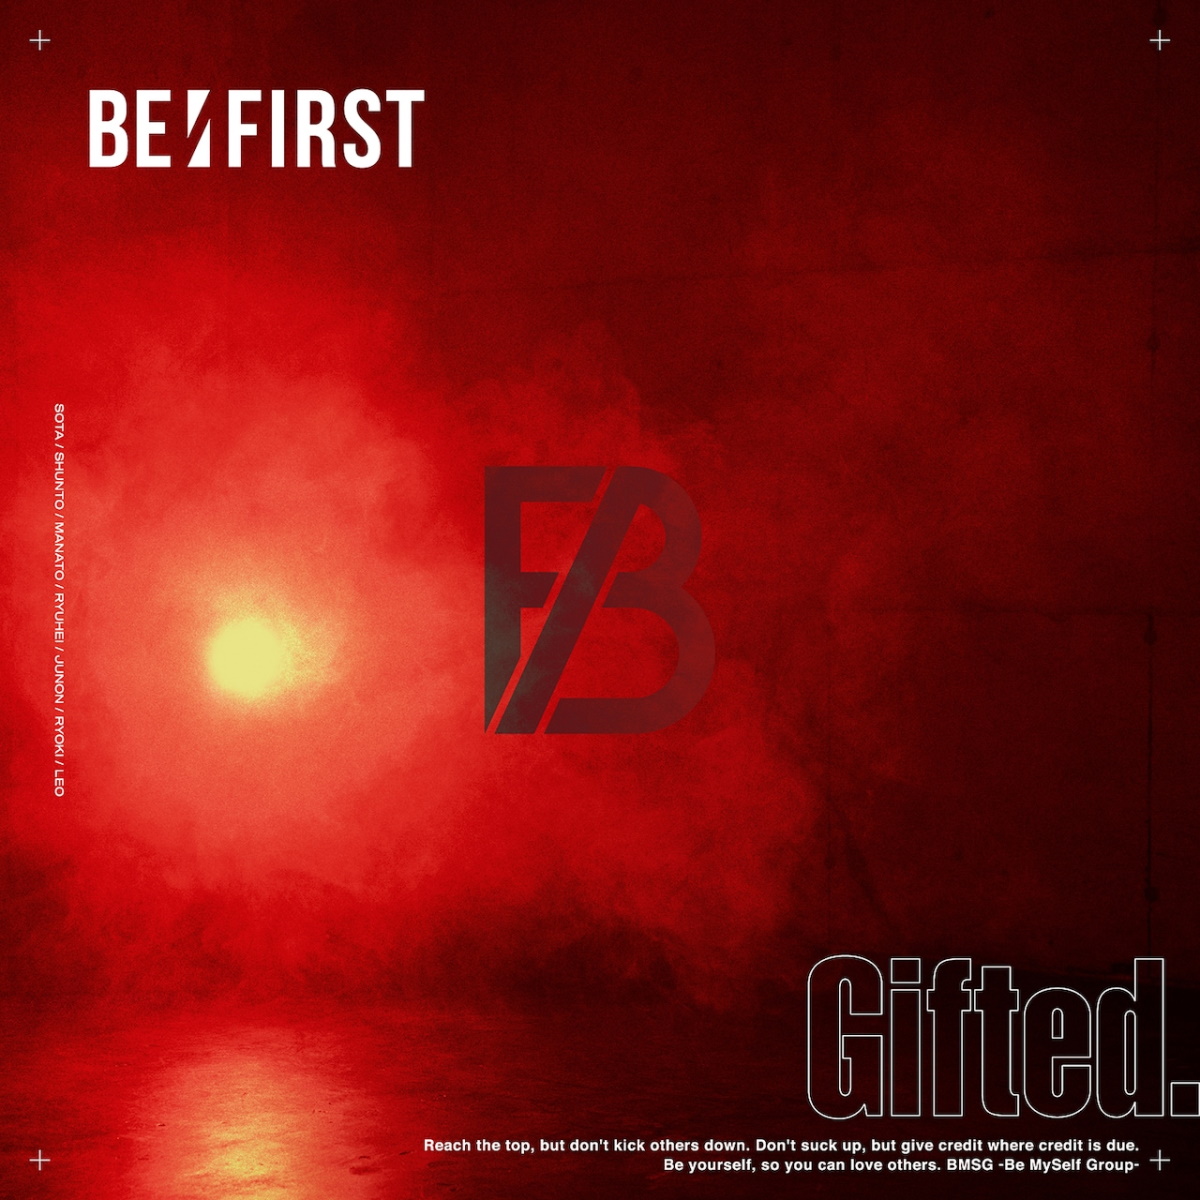 『BE:FIRST - Gifted. 歌詞』収録の『Gifted.』ジャケット